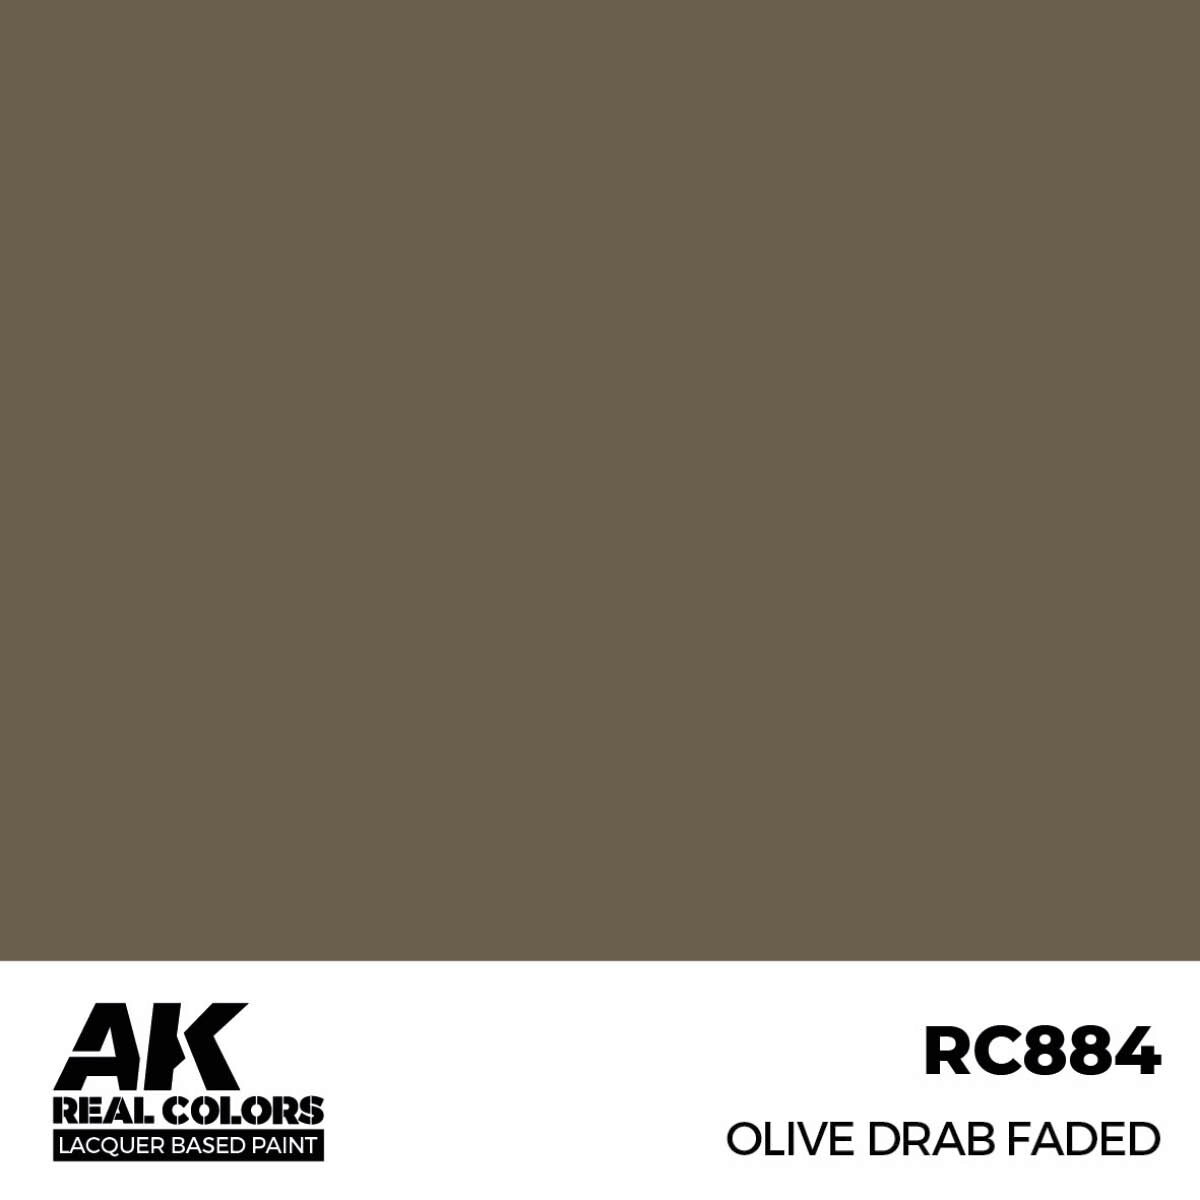 AK RC884 Real Colors Olive Drab Faded 17 ml.